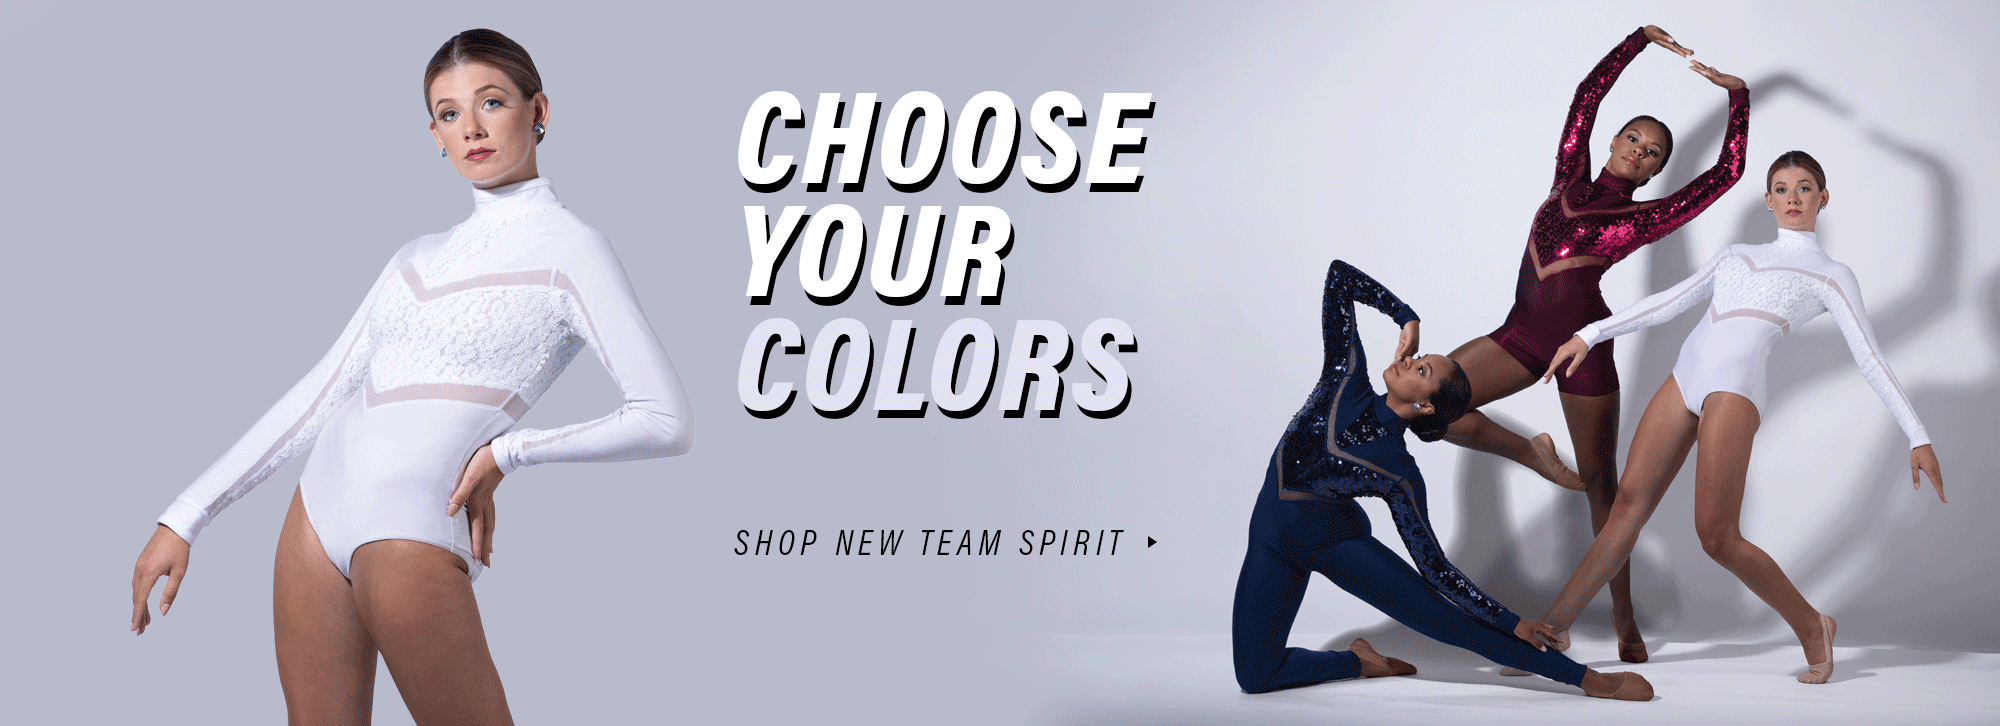 Color customize your own team spirit wardrobe!